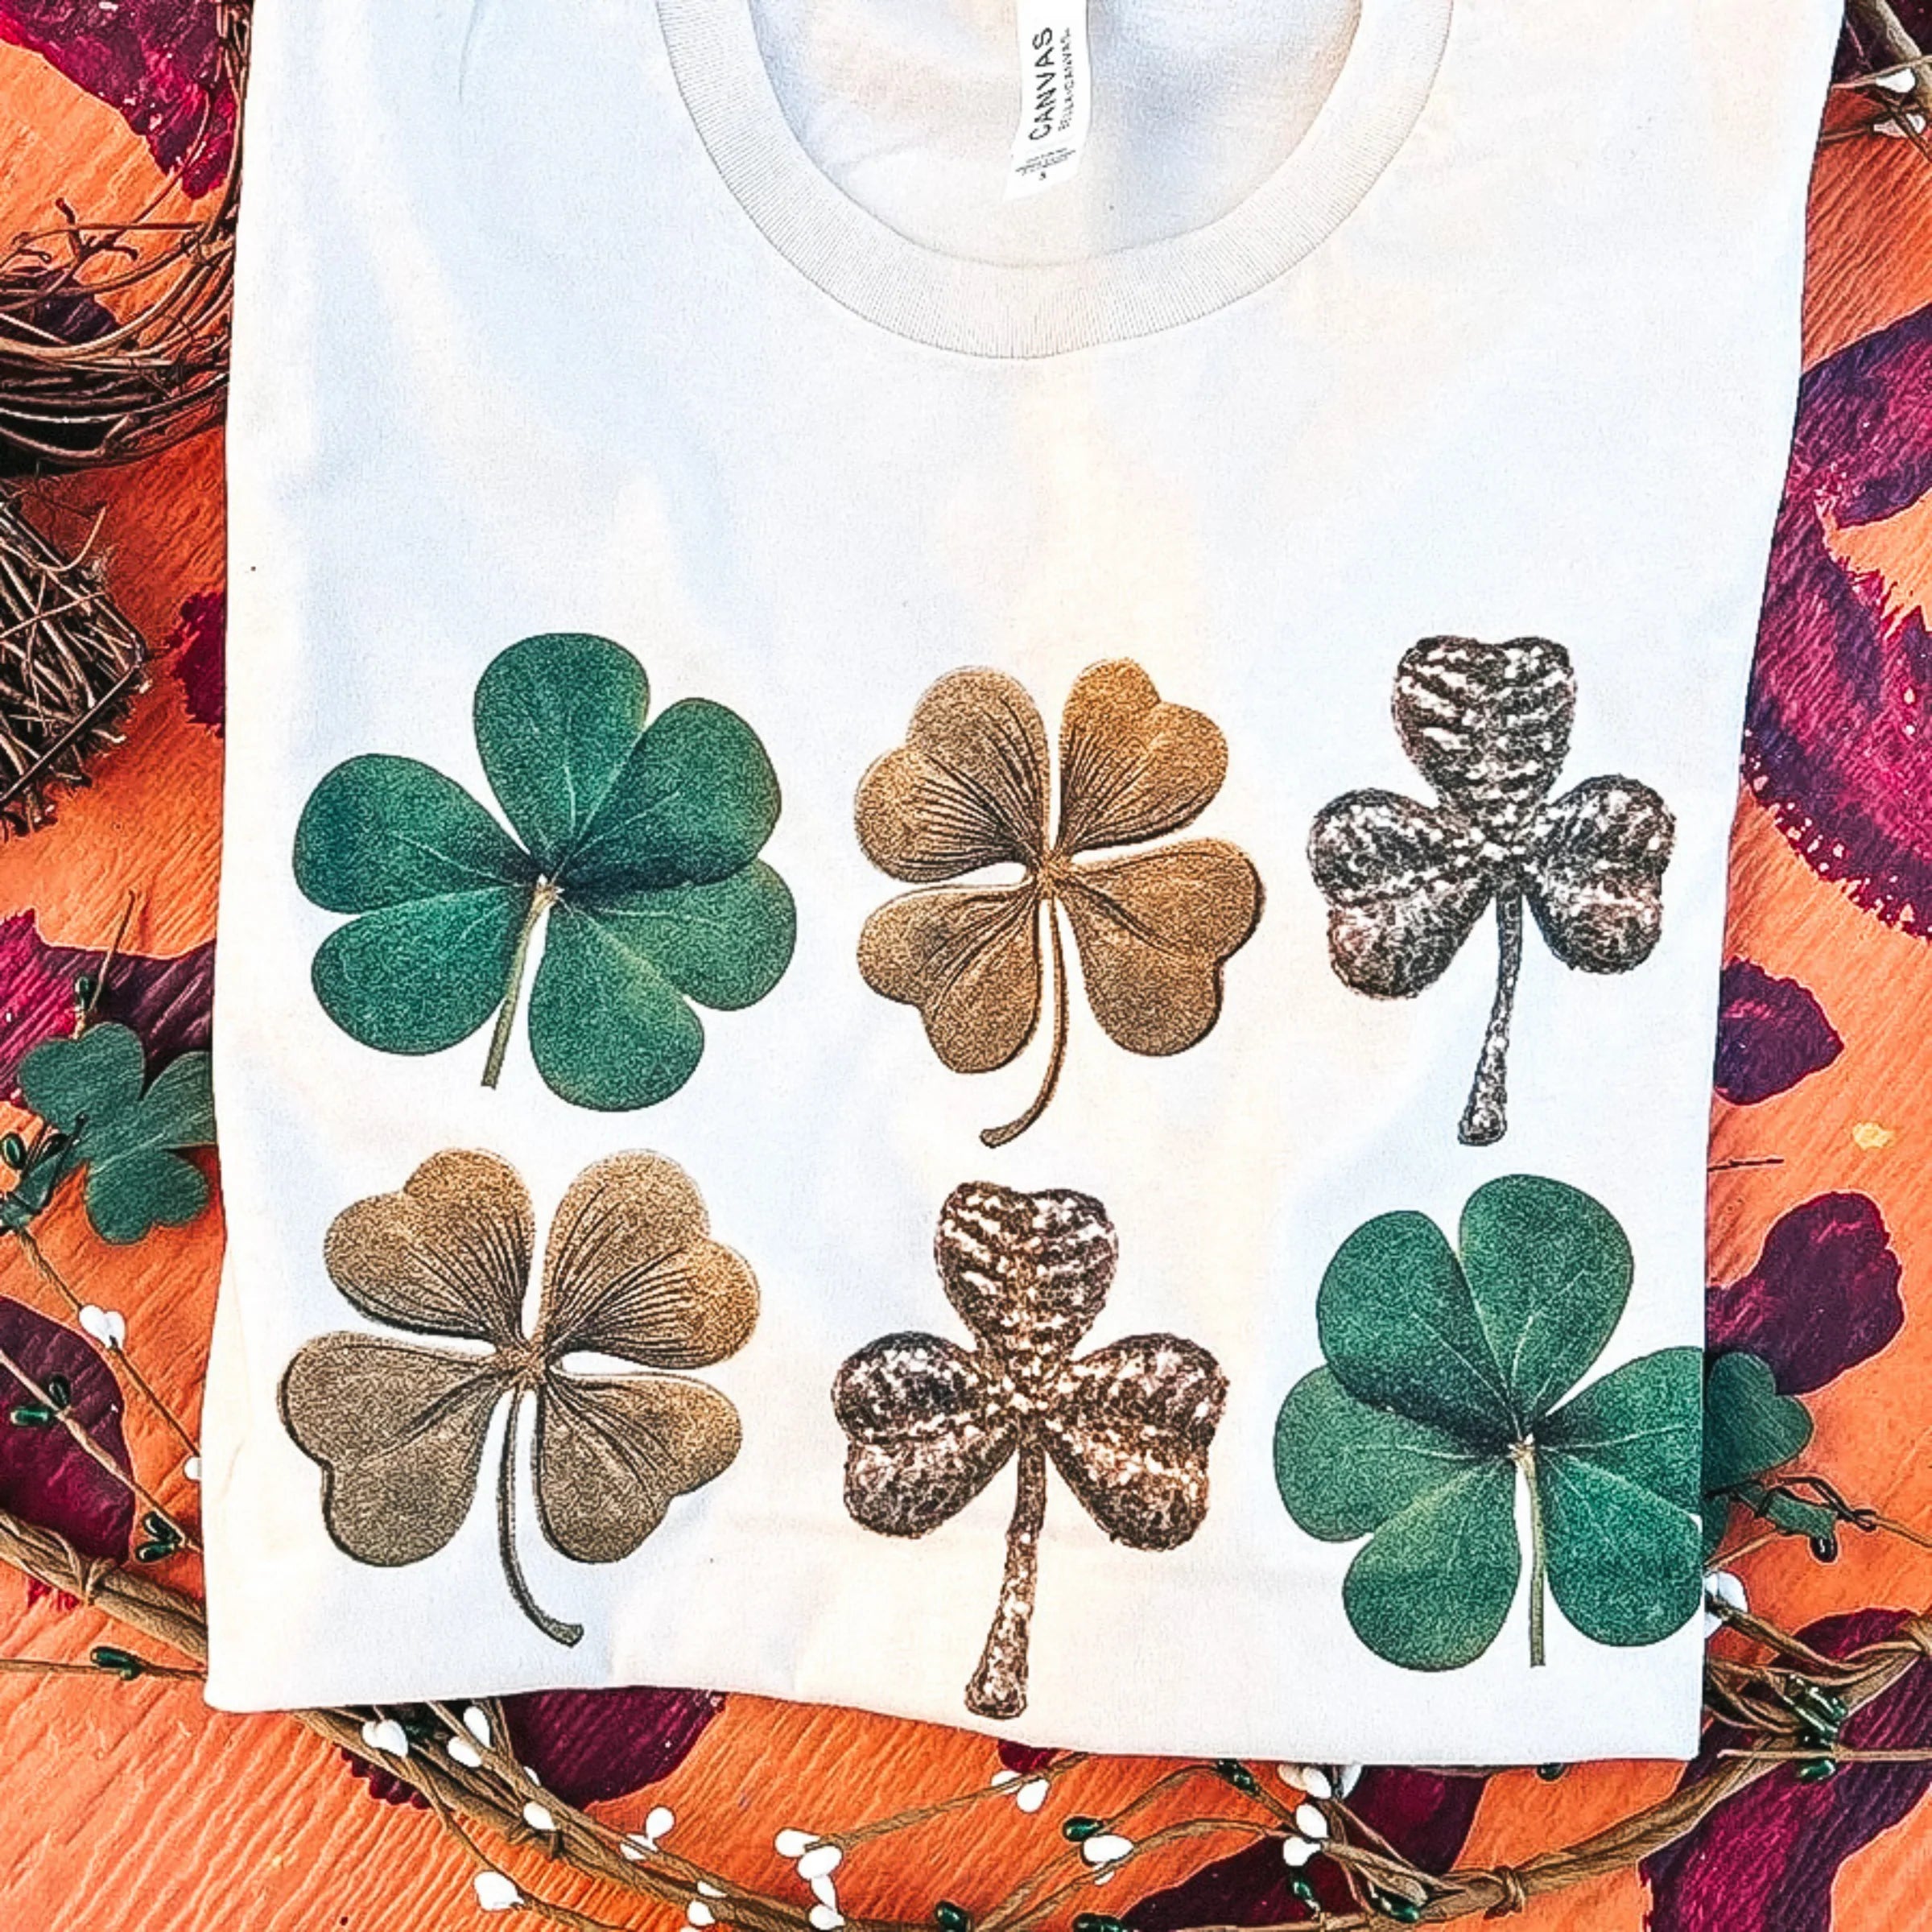 An ivory tee shirt with with a shamrock graphic. Pictured on leopard print background.